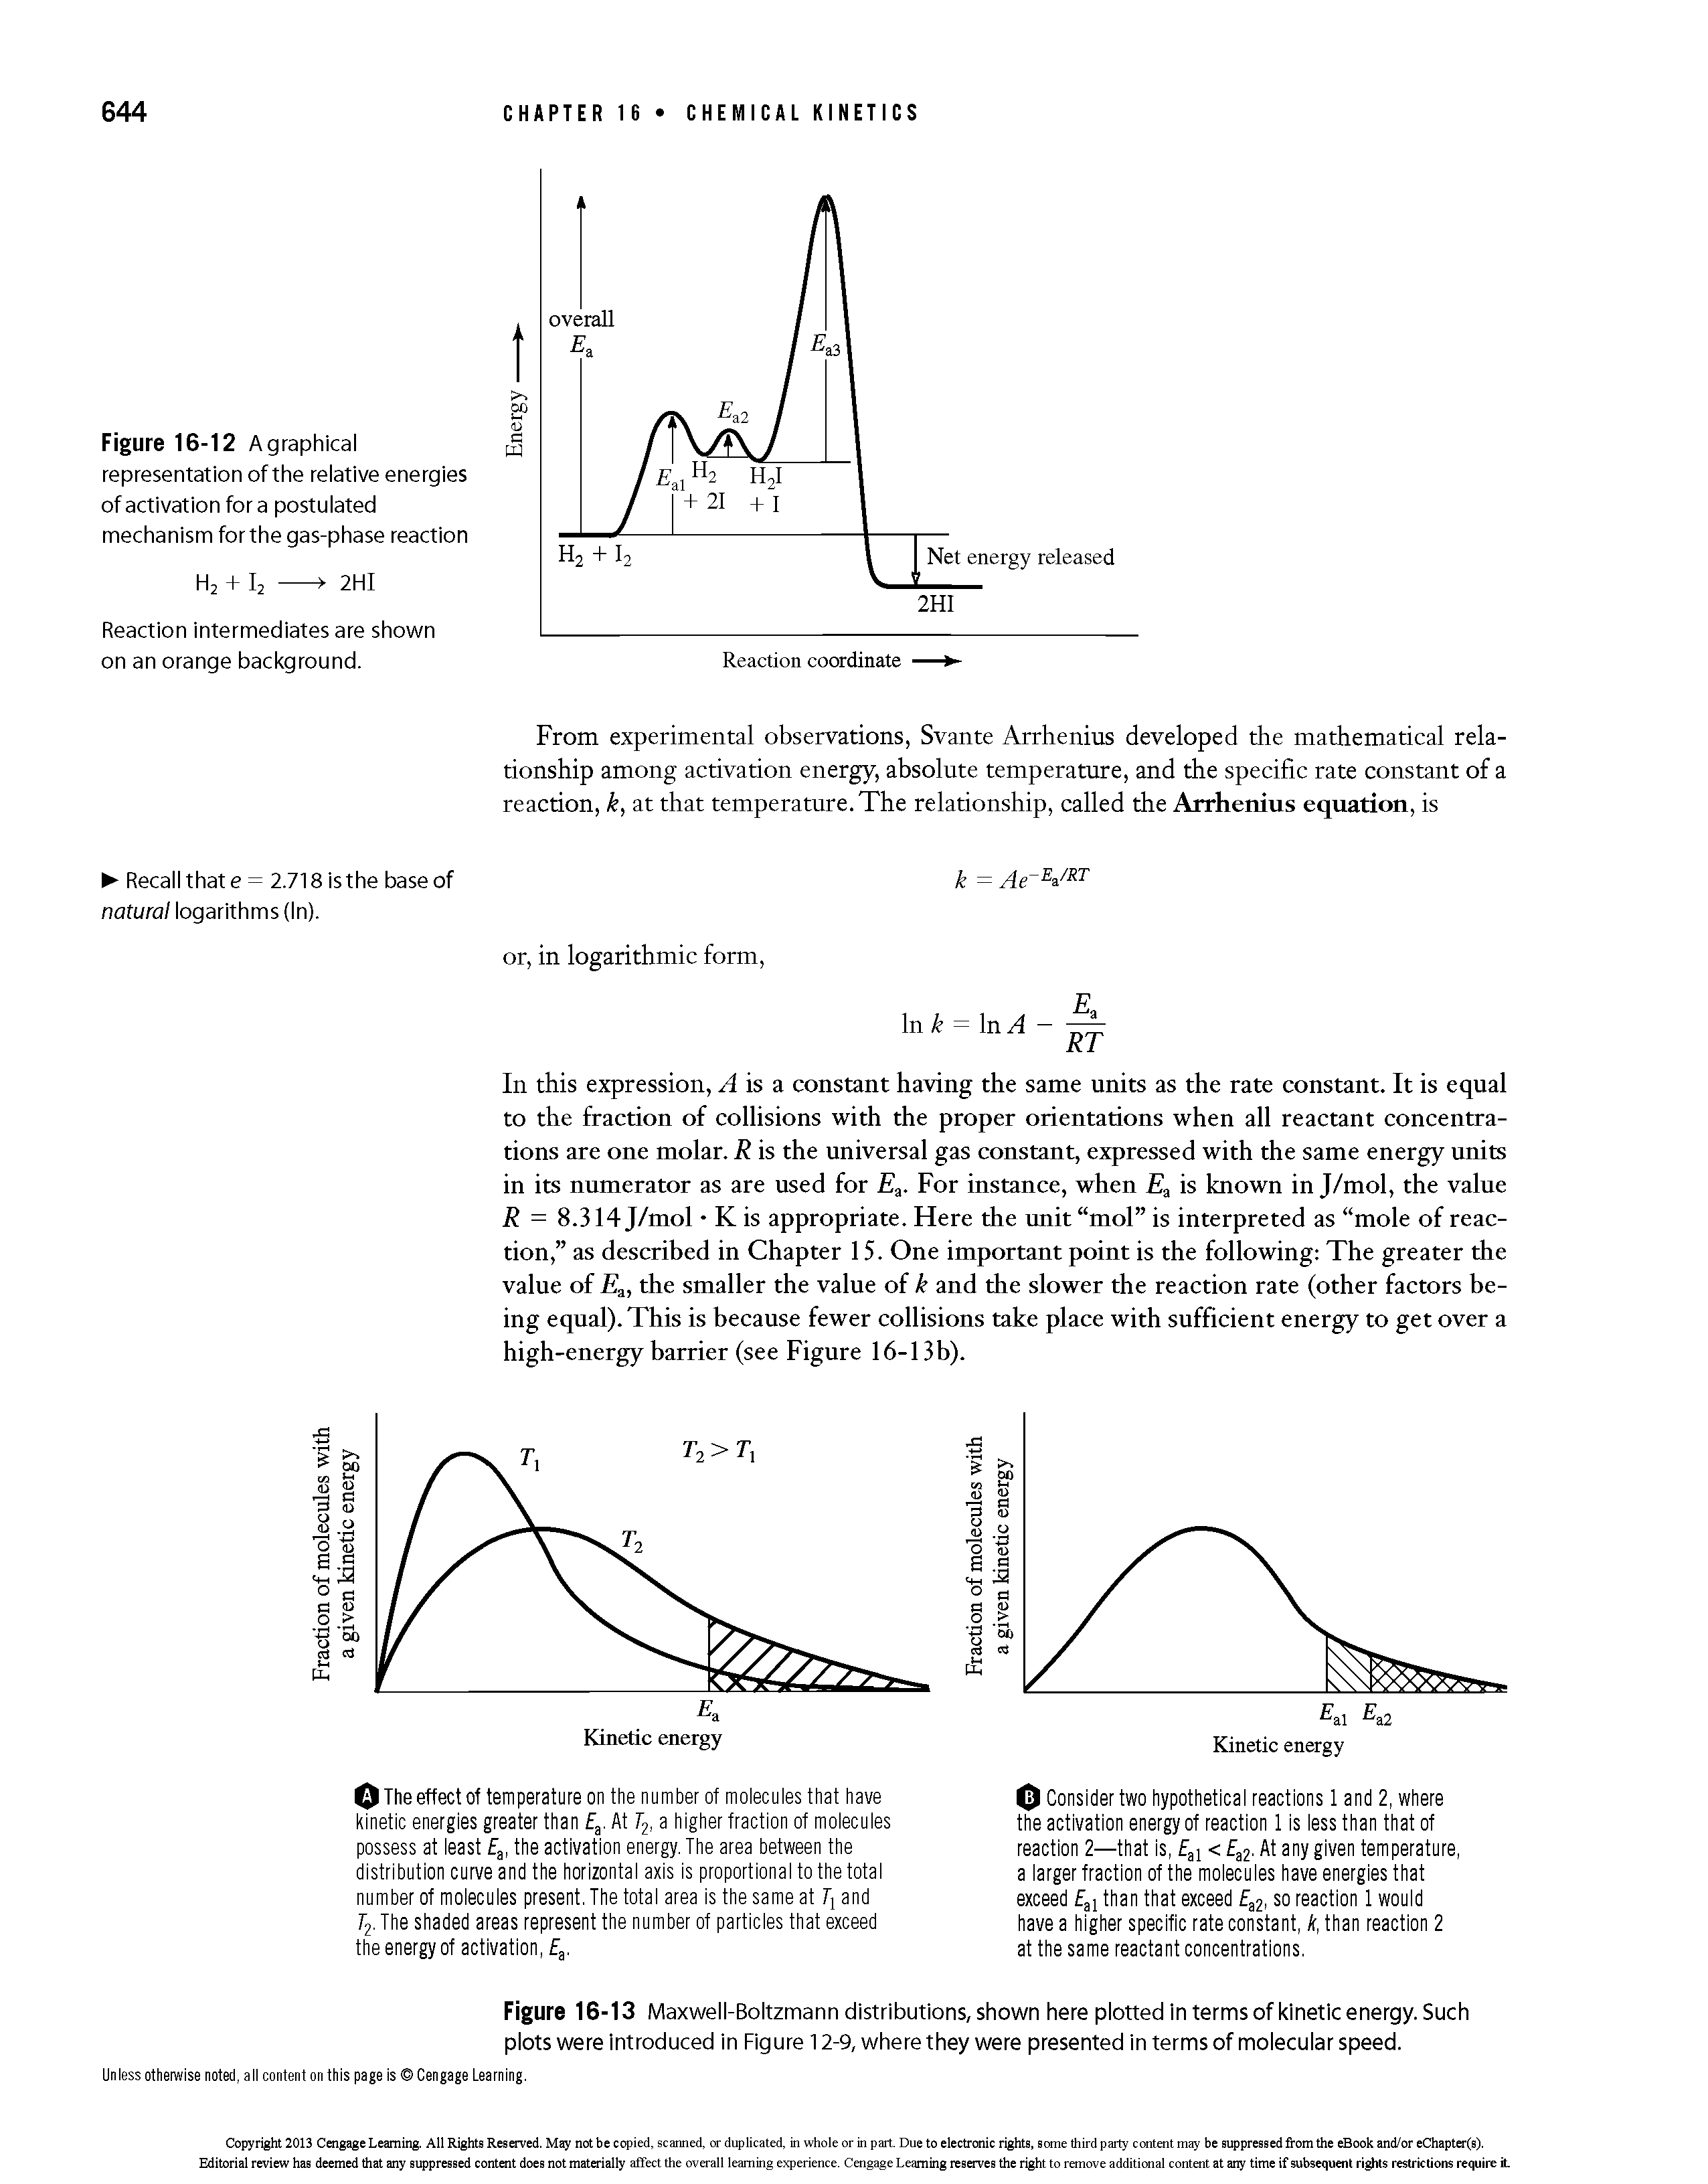 Figure 16-13 Maxwell-Boltzmann distributions, shown here plotted in terms of kinetic energy. Such plots were Introduced in Figure 12-9, where they were presented in termsof molecular speed.